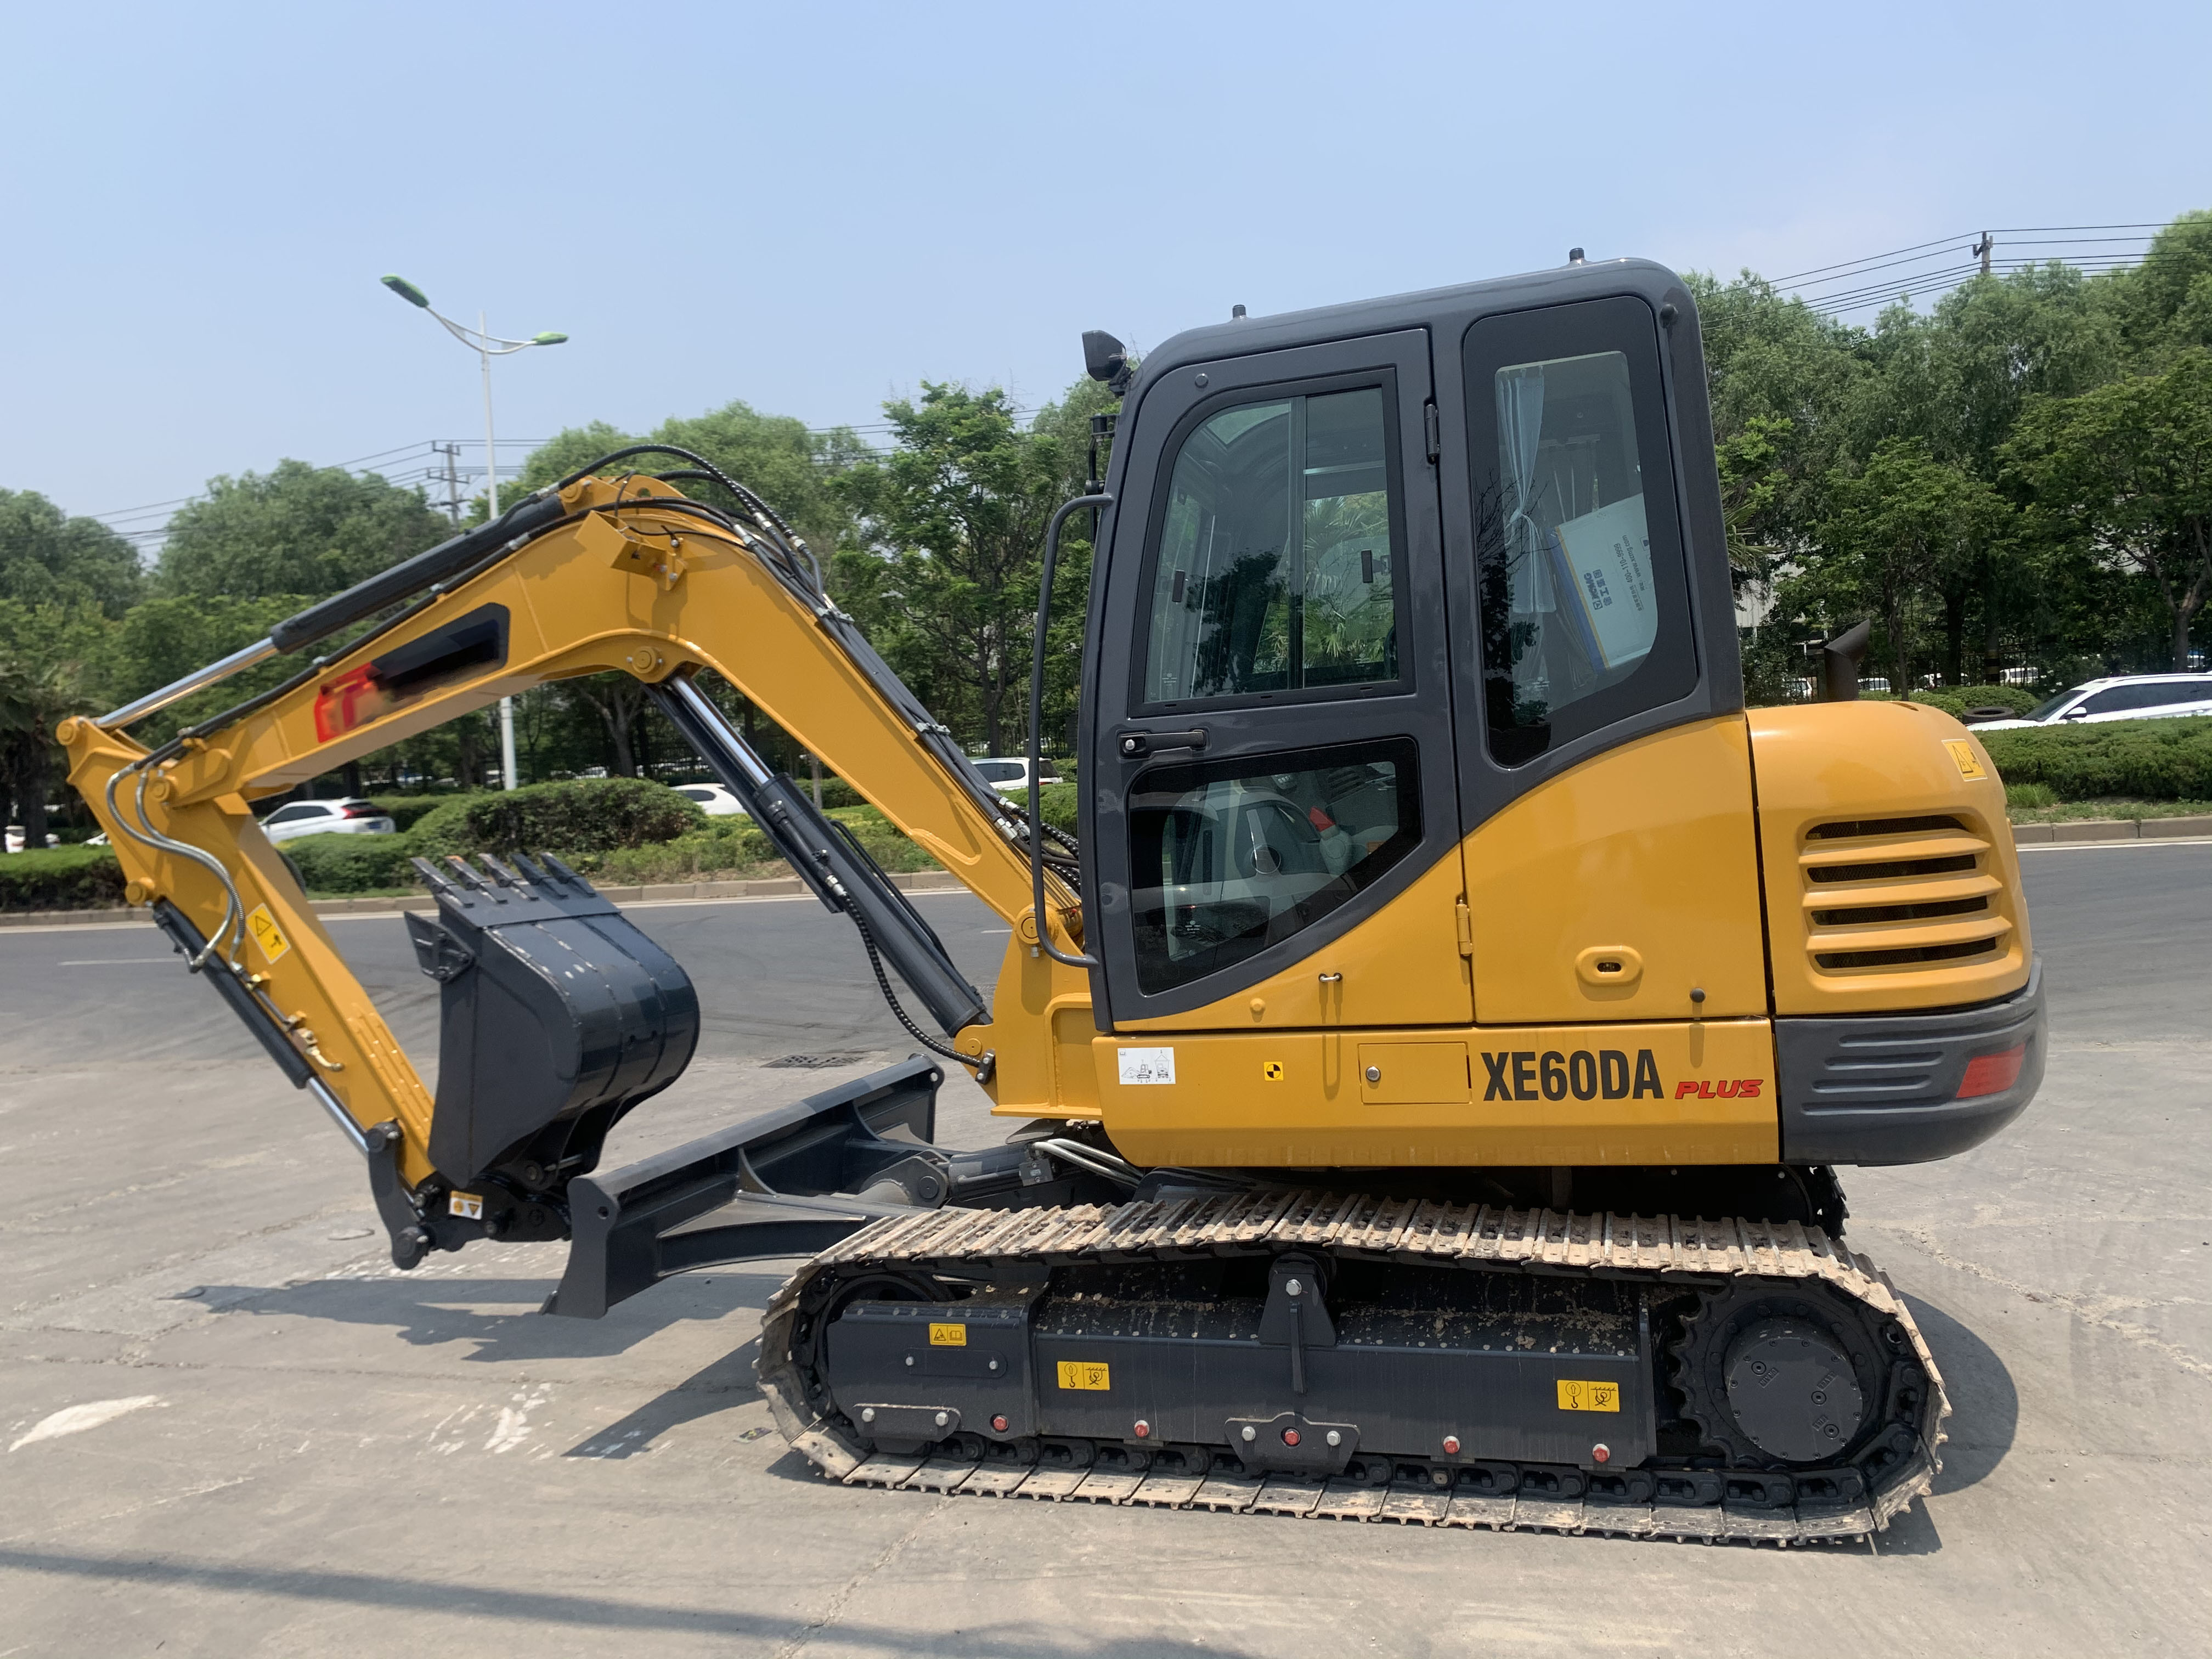 Hot Sale Earth-Moving Machine Xe60da 6ton Digger Crawler Excavator in Philippines